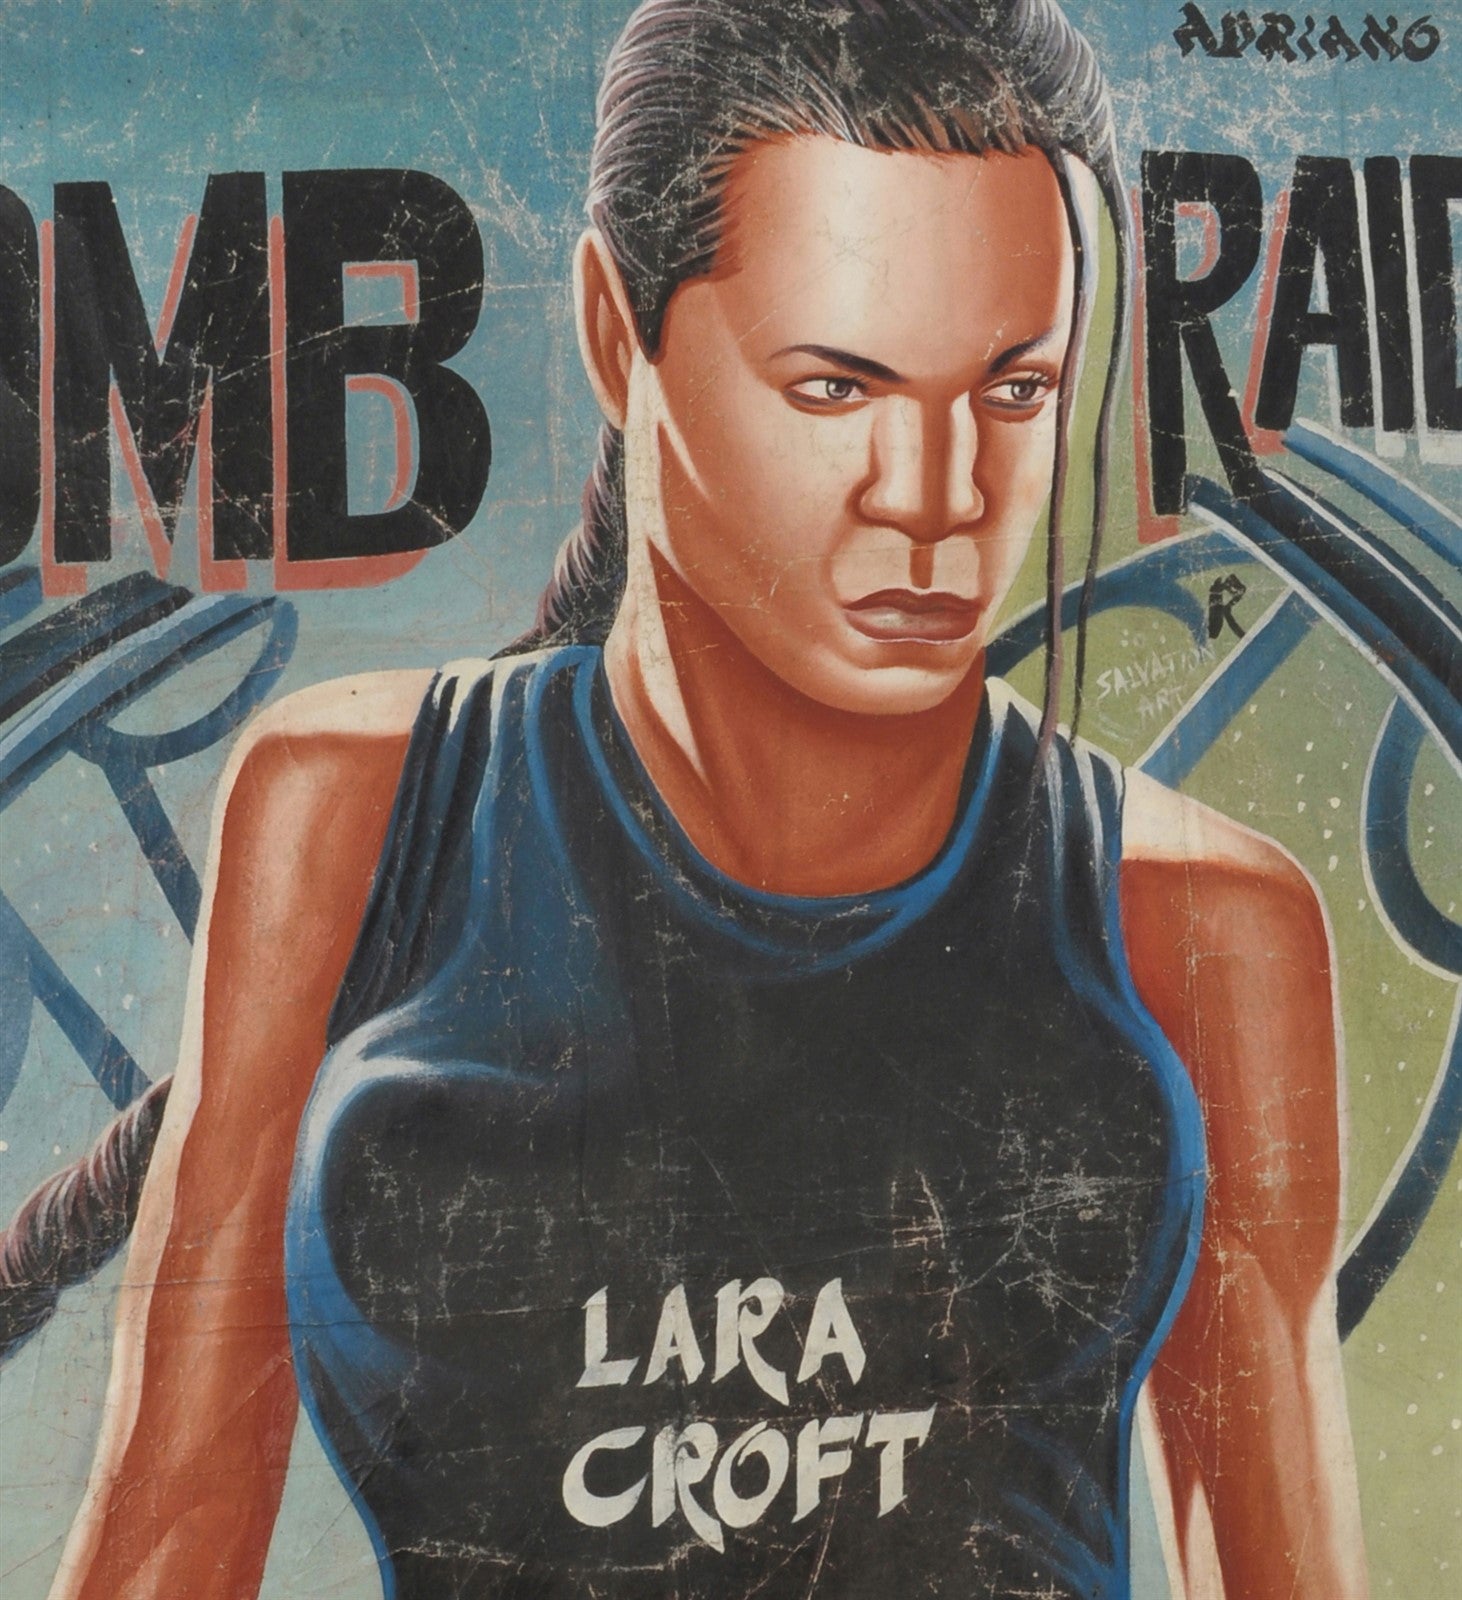 TOMB RAIDER MOVIE POSTER LARA CROFT HAND PAINTED IN GHANA FOR THE LOCAL CINEMA ART DETAILS